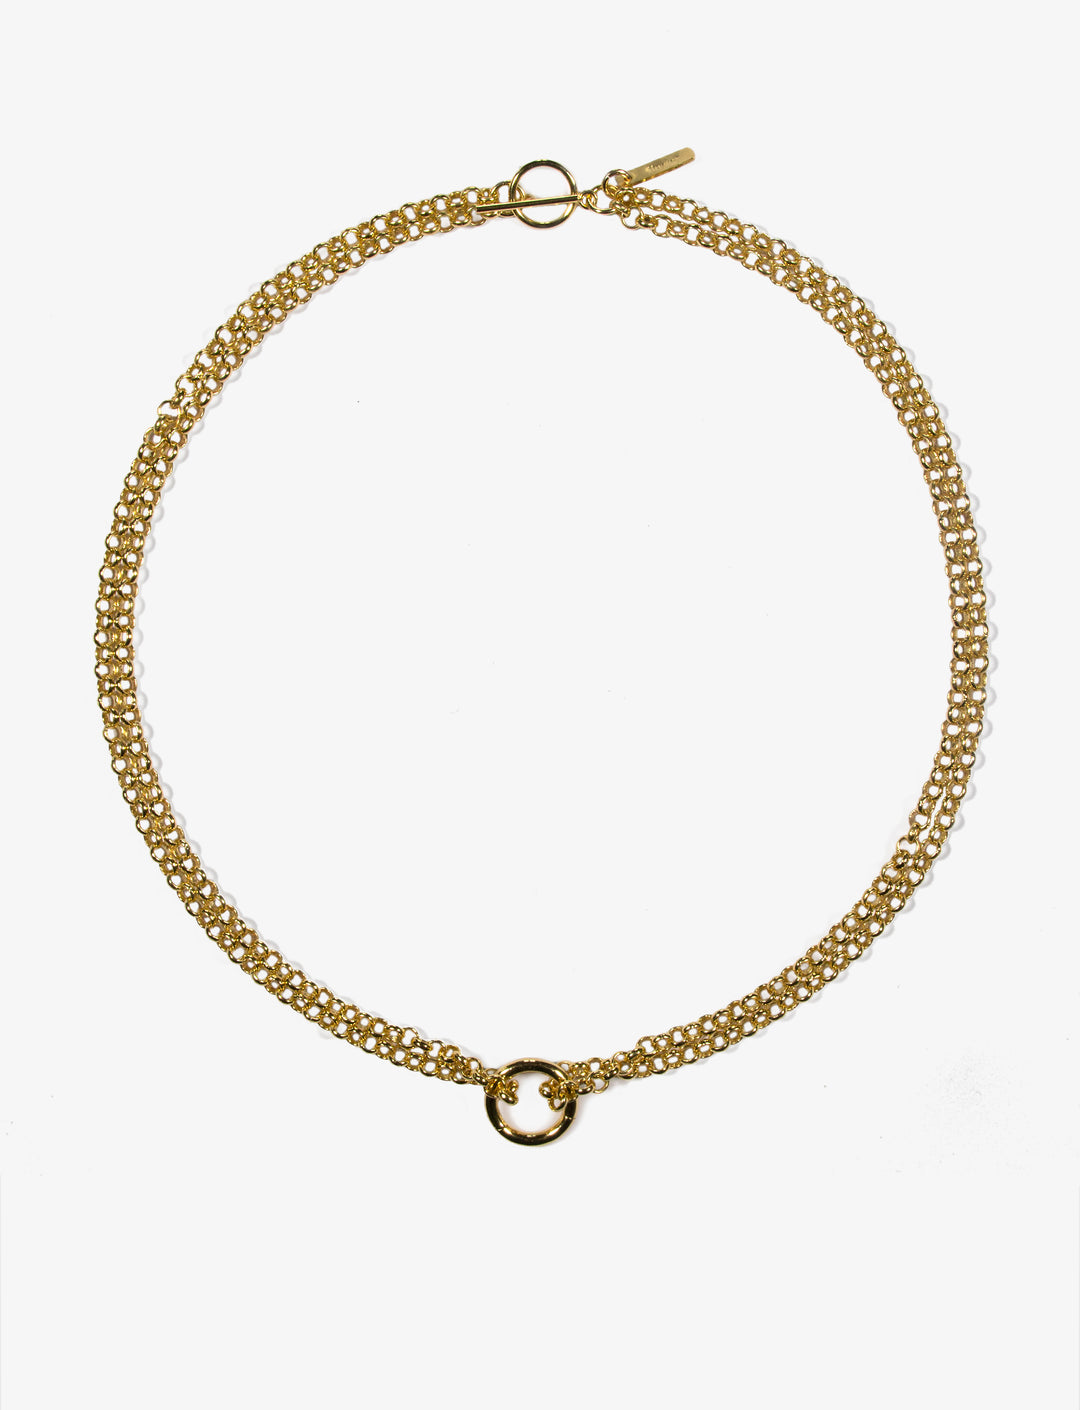 llayers jewelry Women gold chain rings choker necklace - Made In Brookyn New York 2